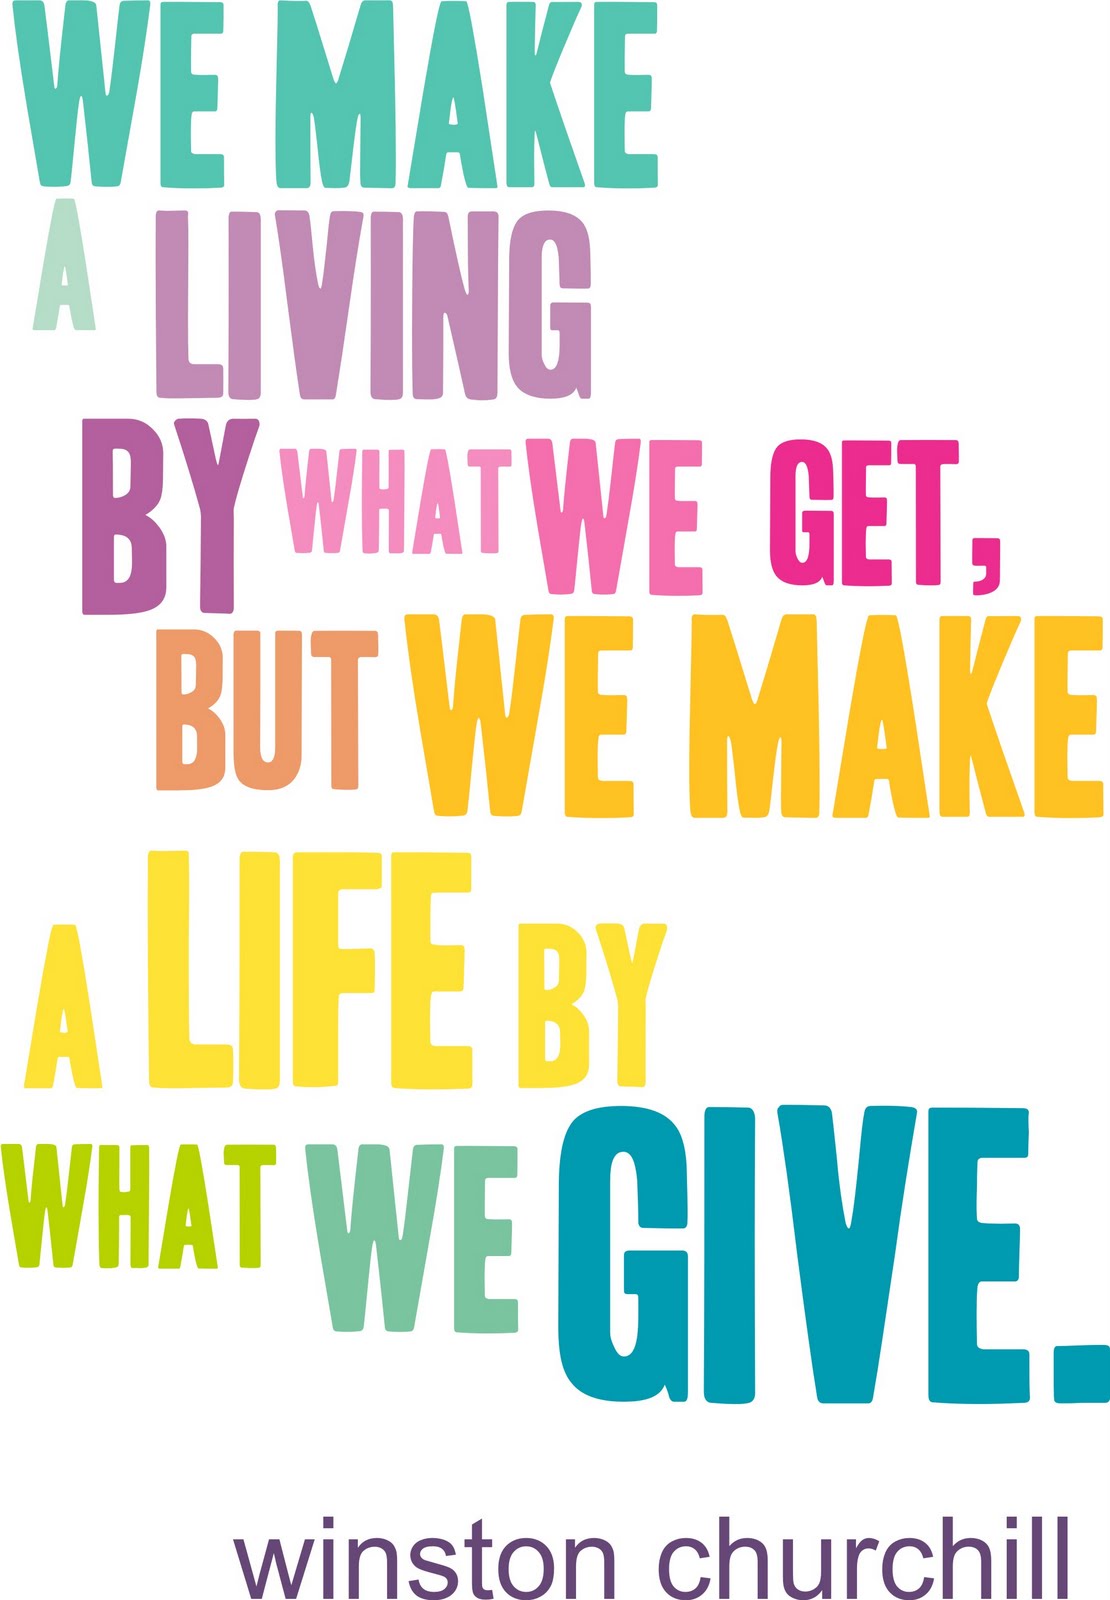 We make a living by what we get, but we make a life by what we give. Winston Churchill